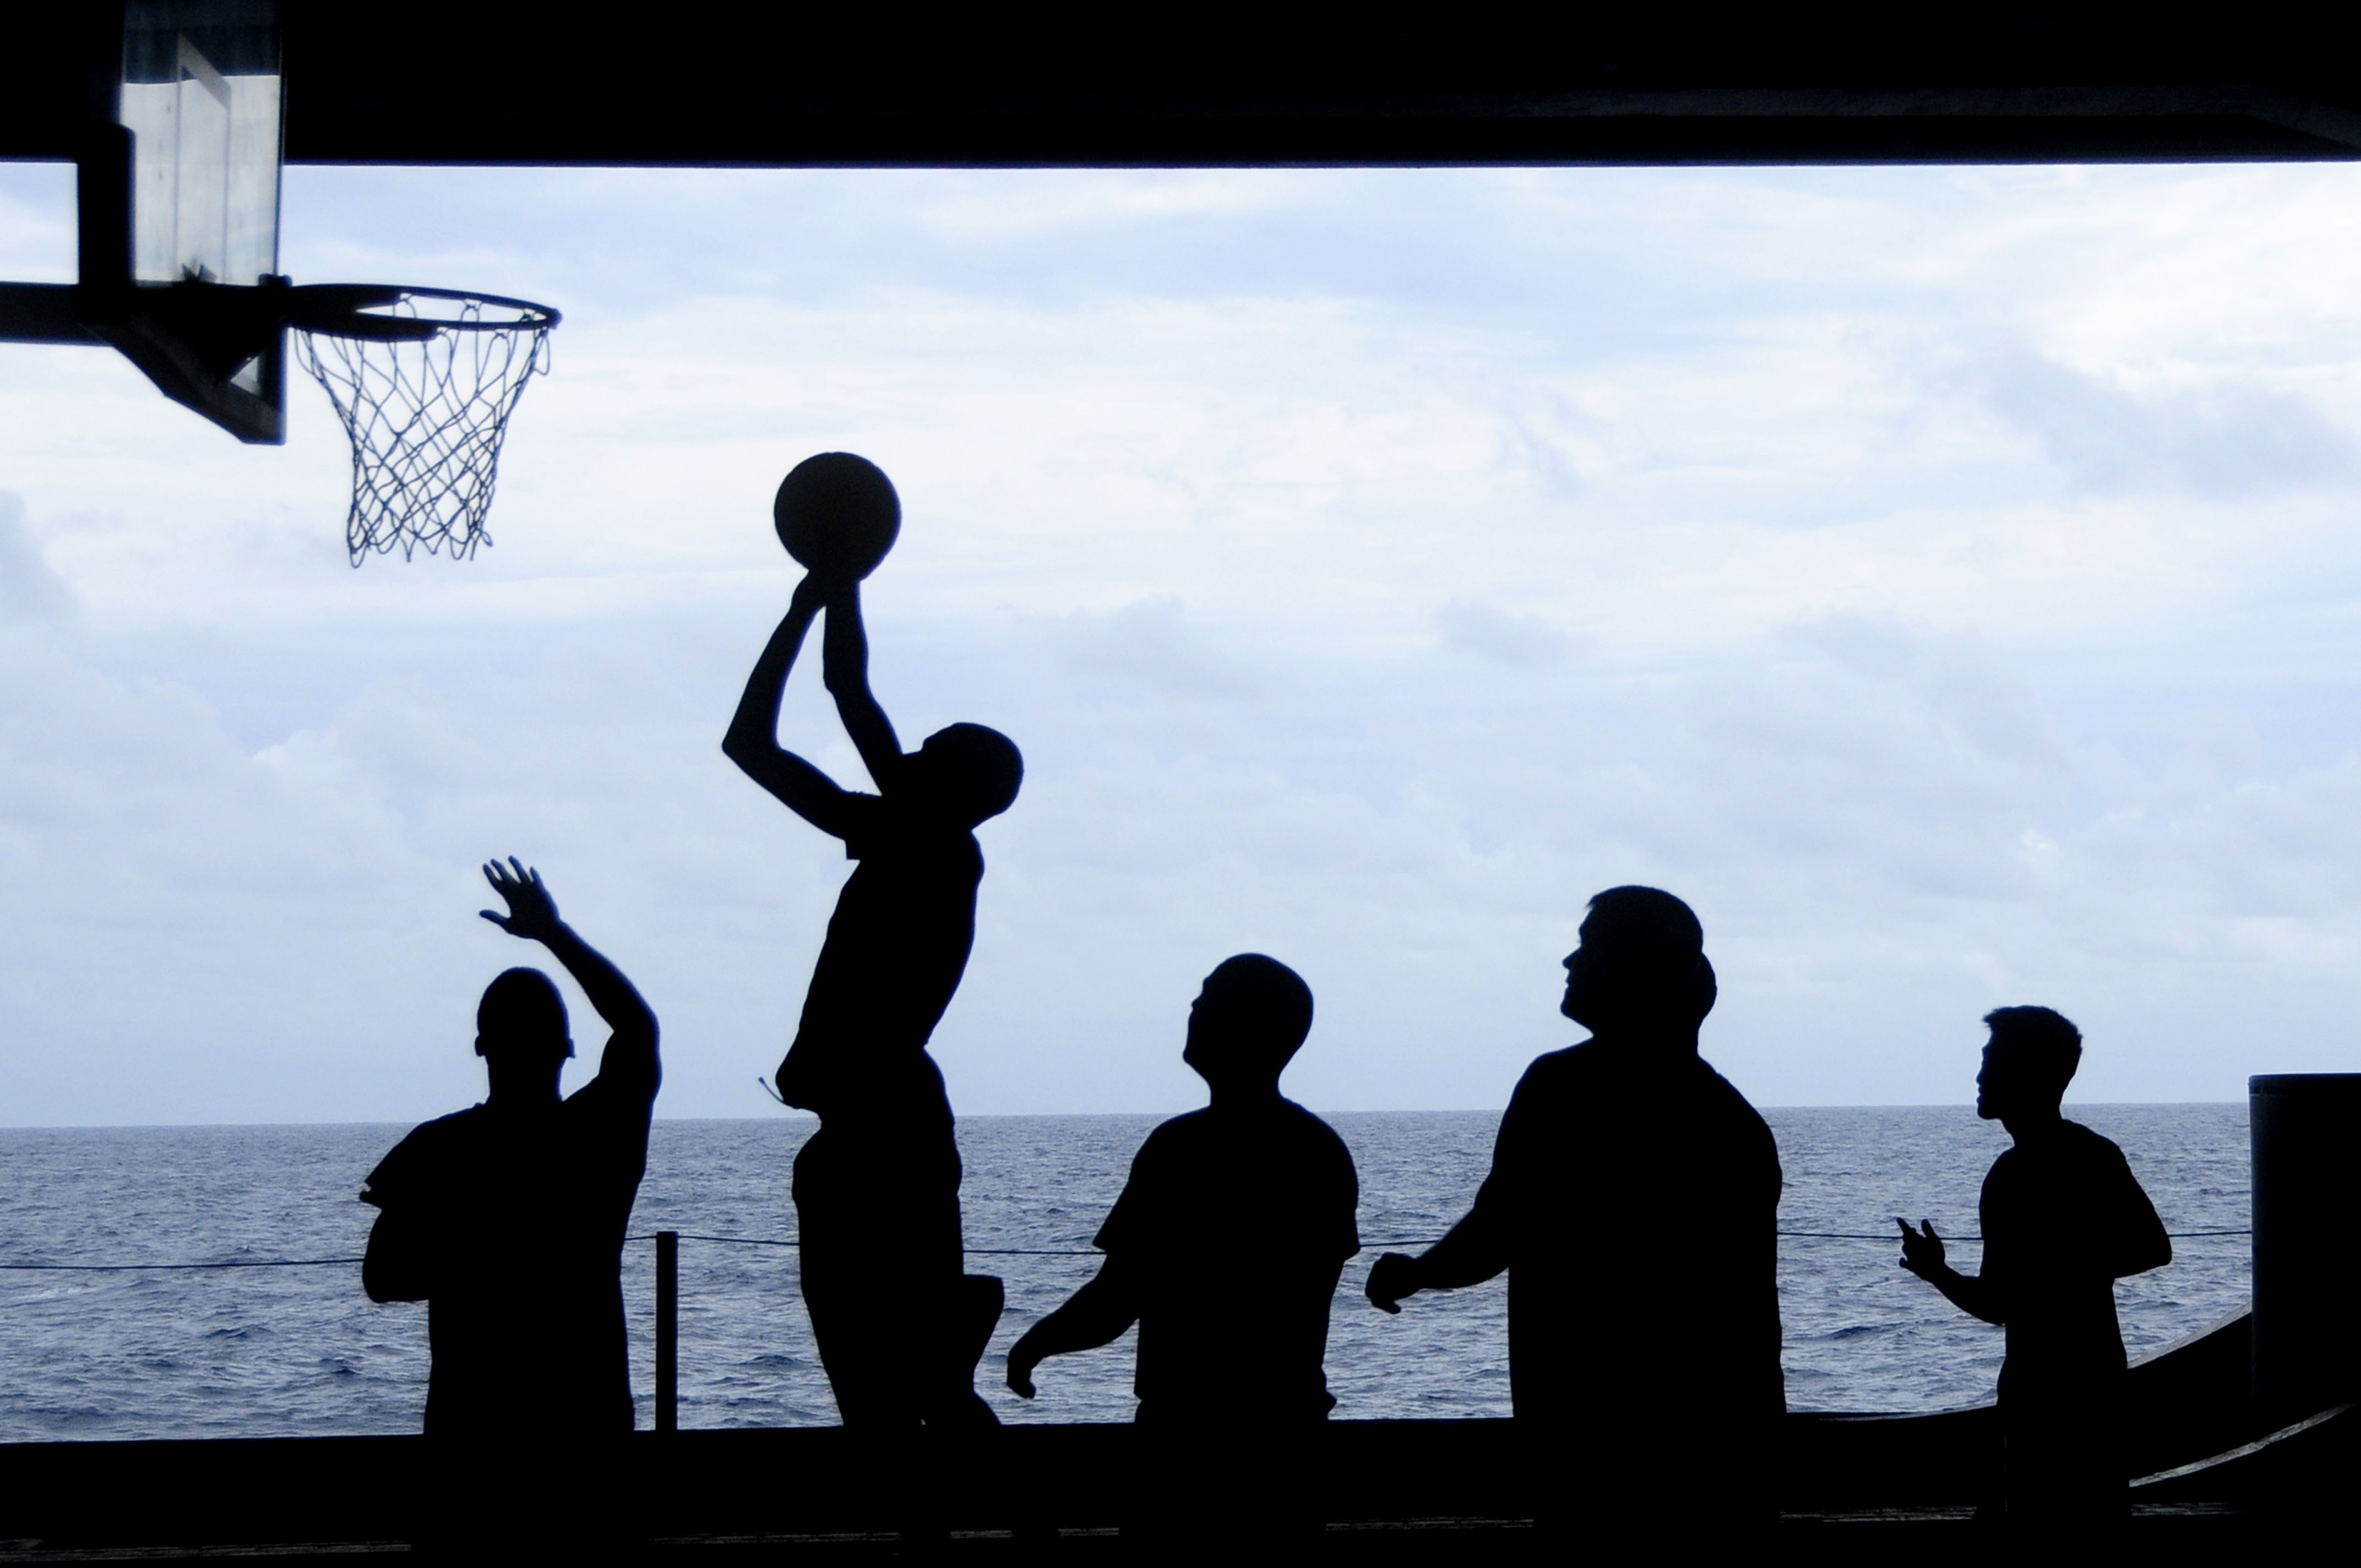 People playing basketball in silhouette